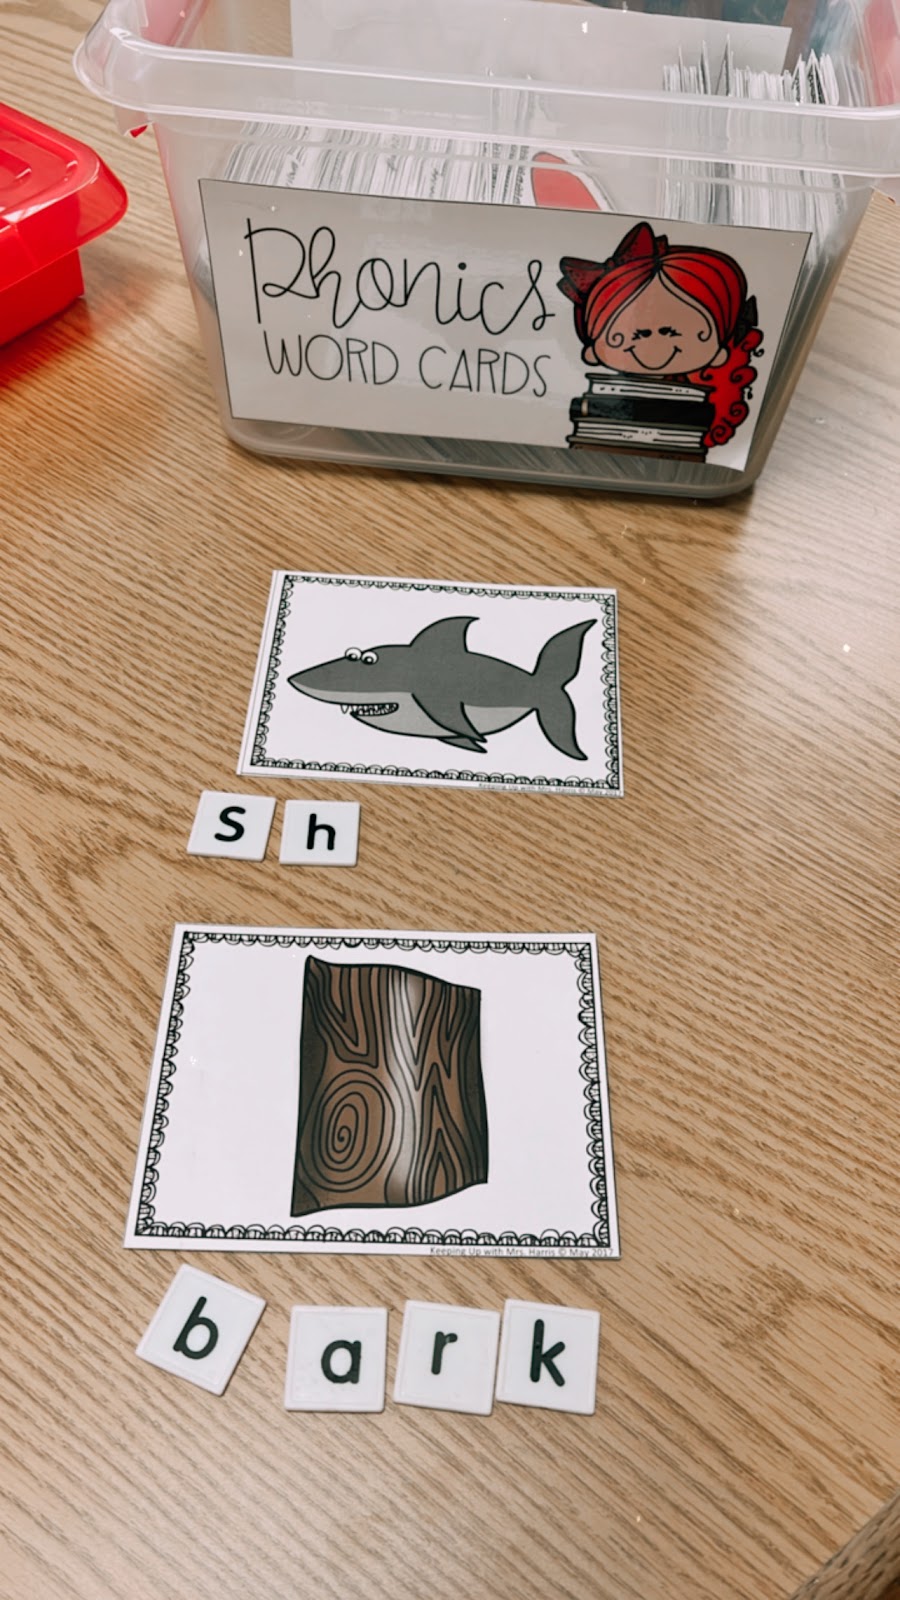 Phonics Word Cards - Teach phonics with visuals to help learners as they learn new phonics patterns.